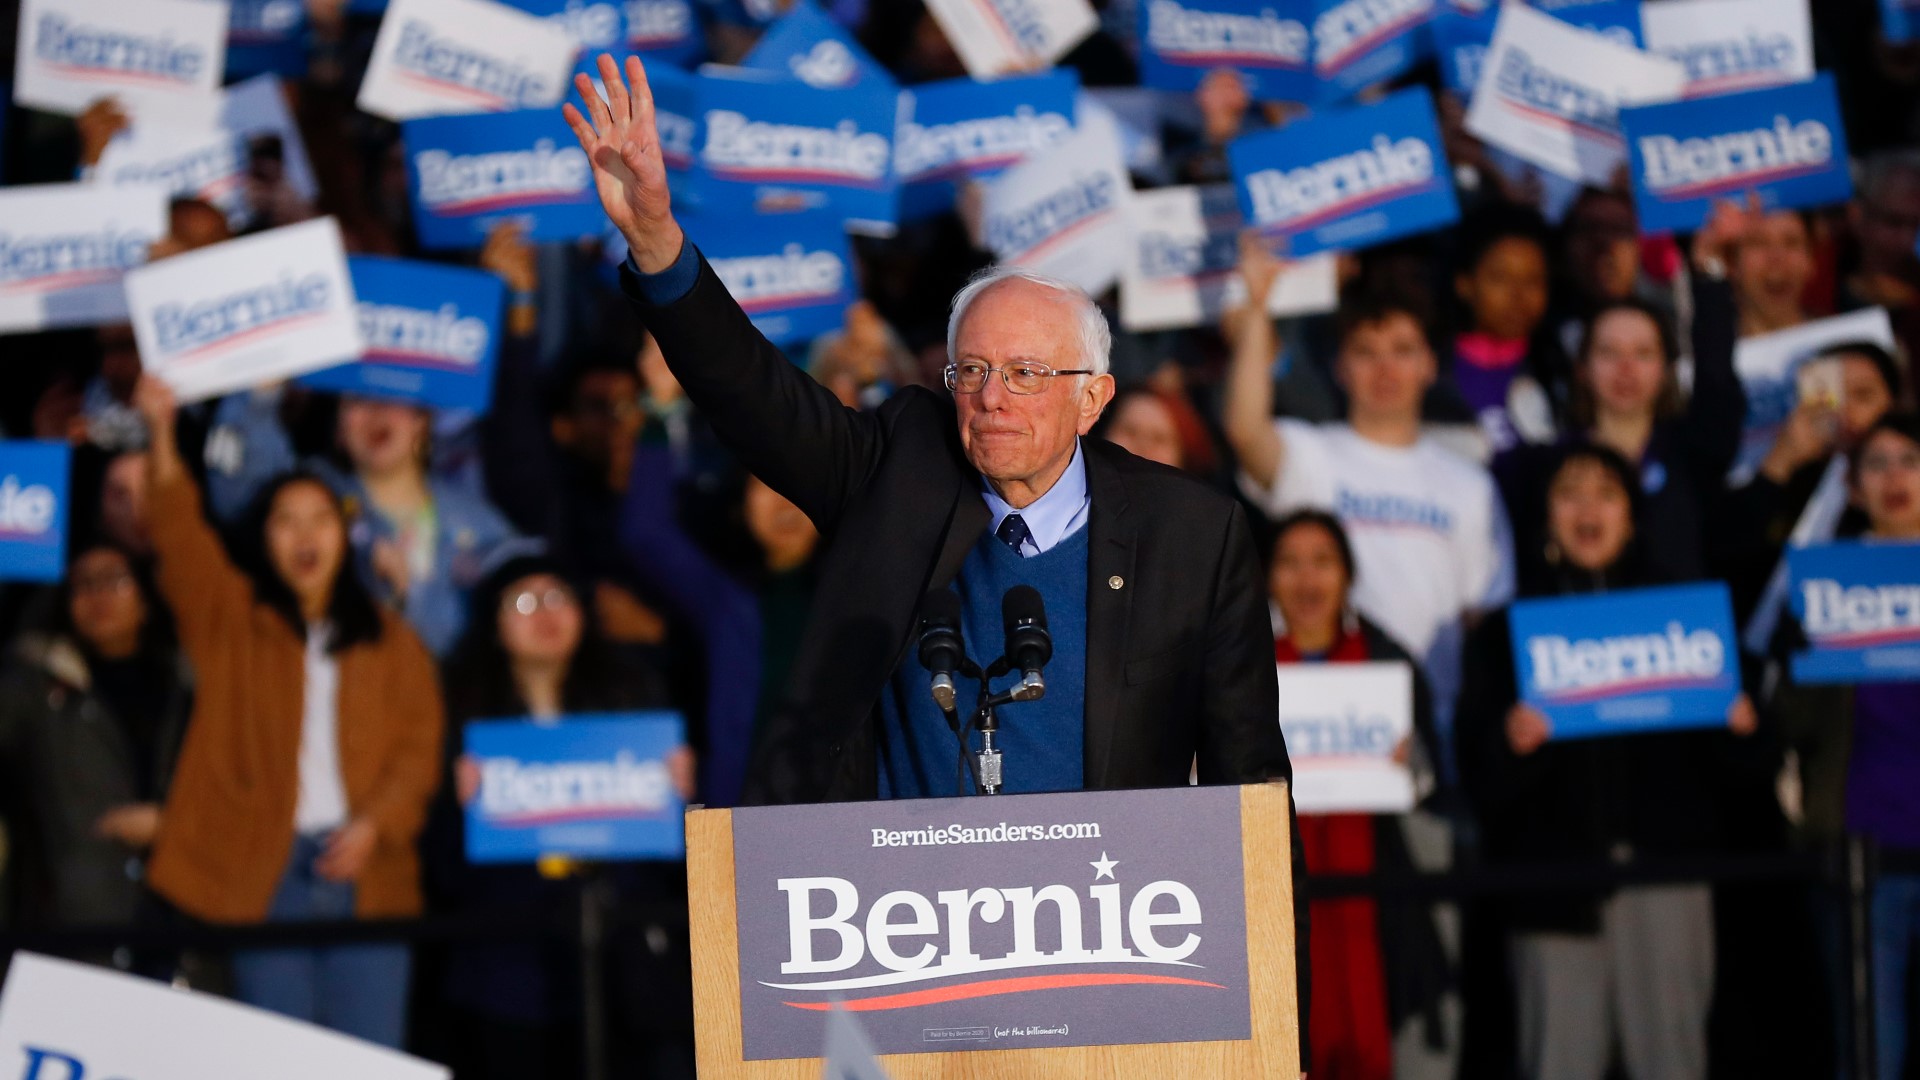 Sanders will speak at the University of New England's commencement ceremony May 18.